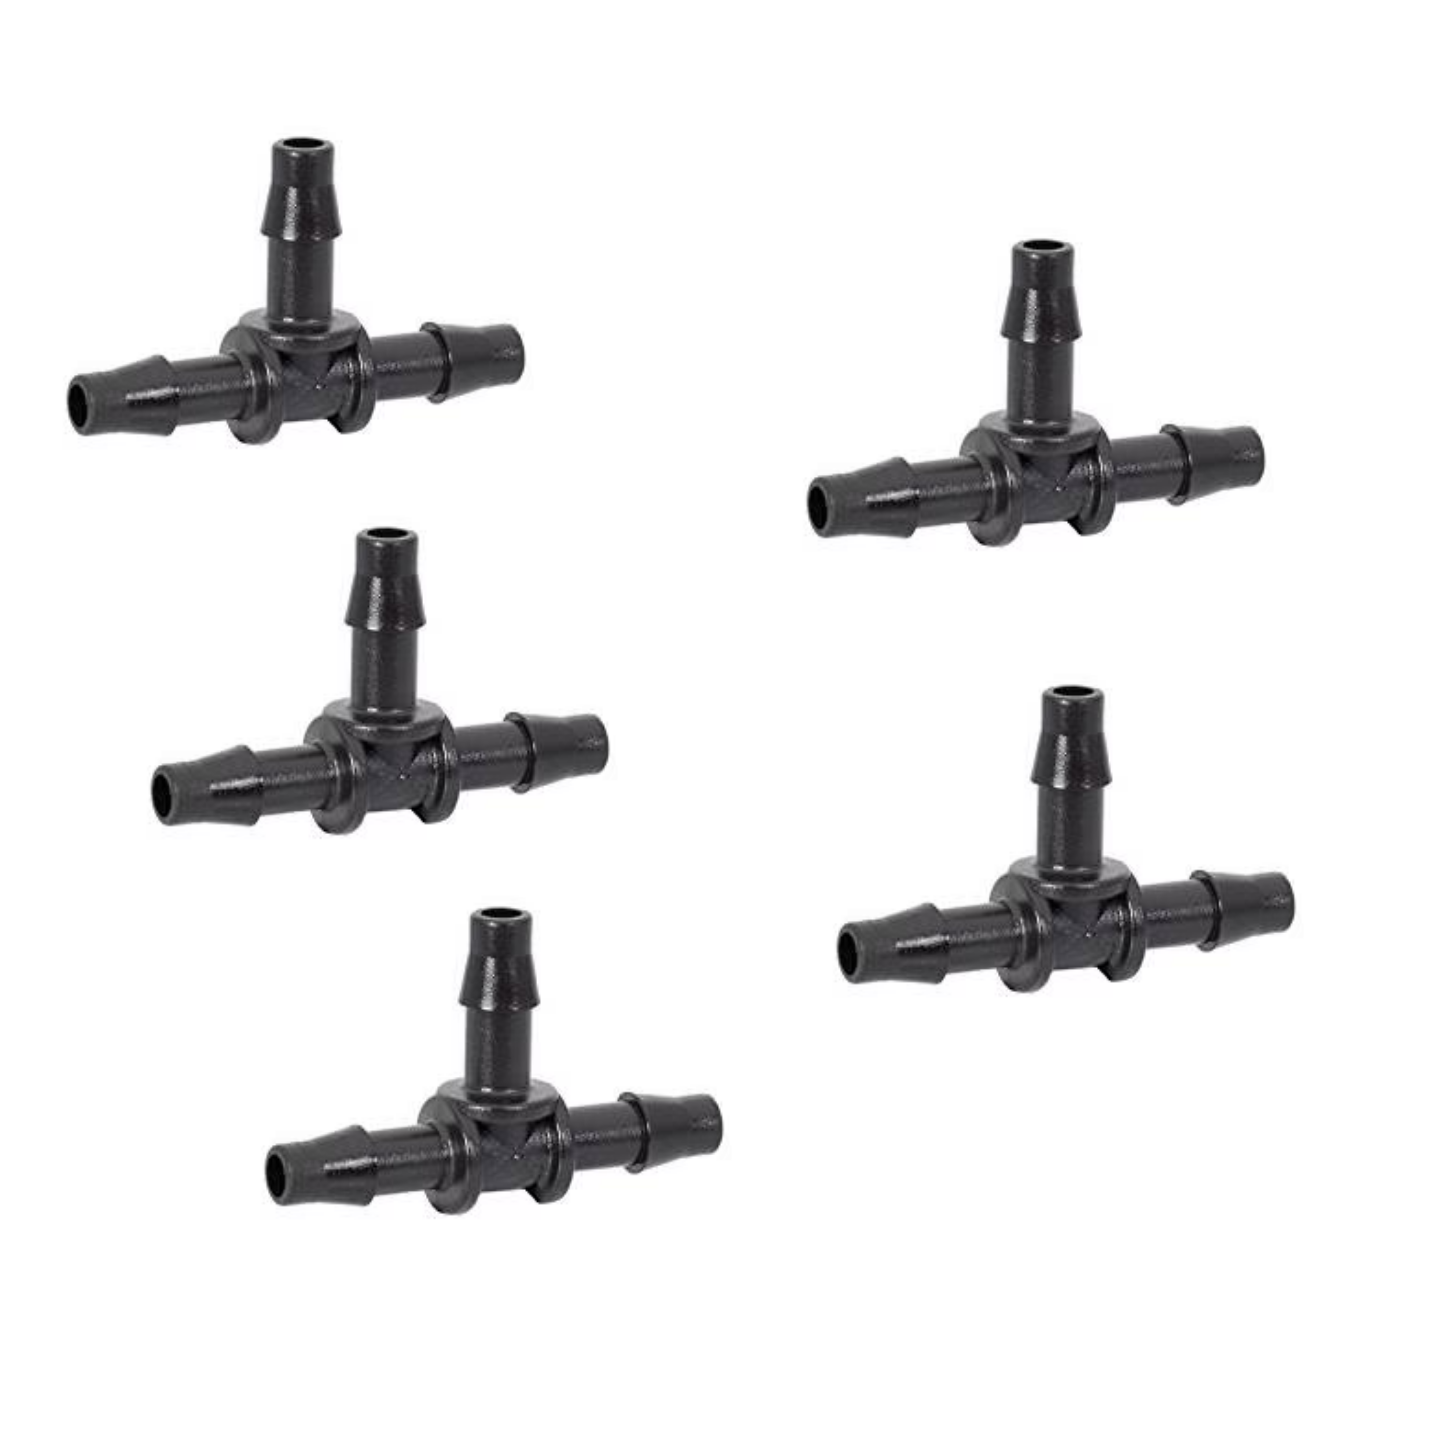 4mm Barbed Tee – Pack of 5